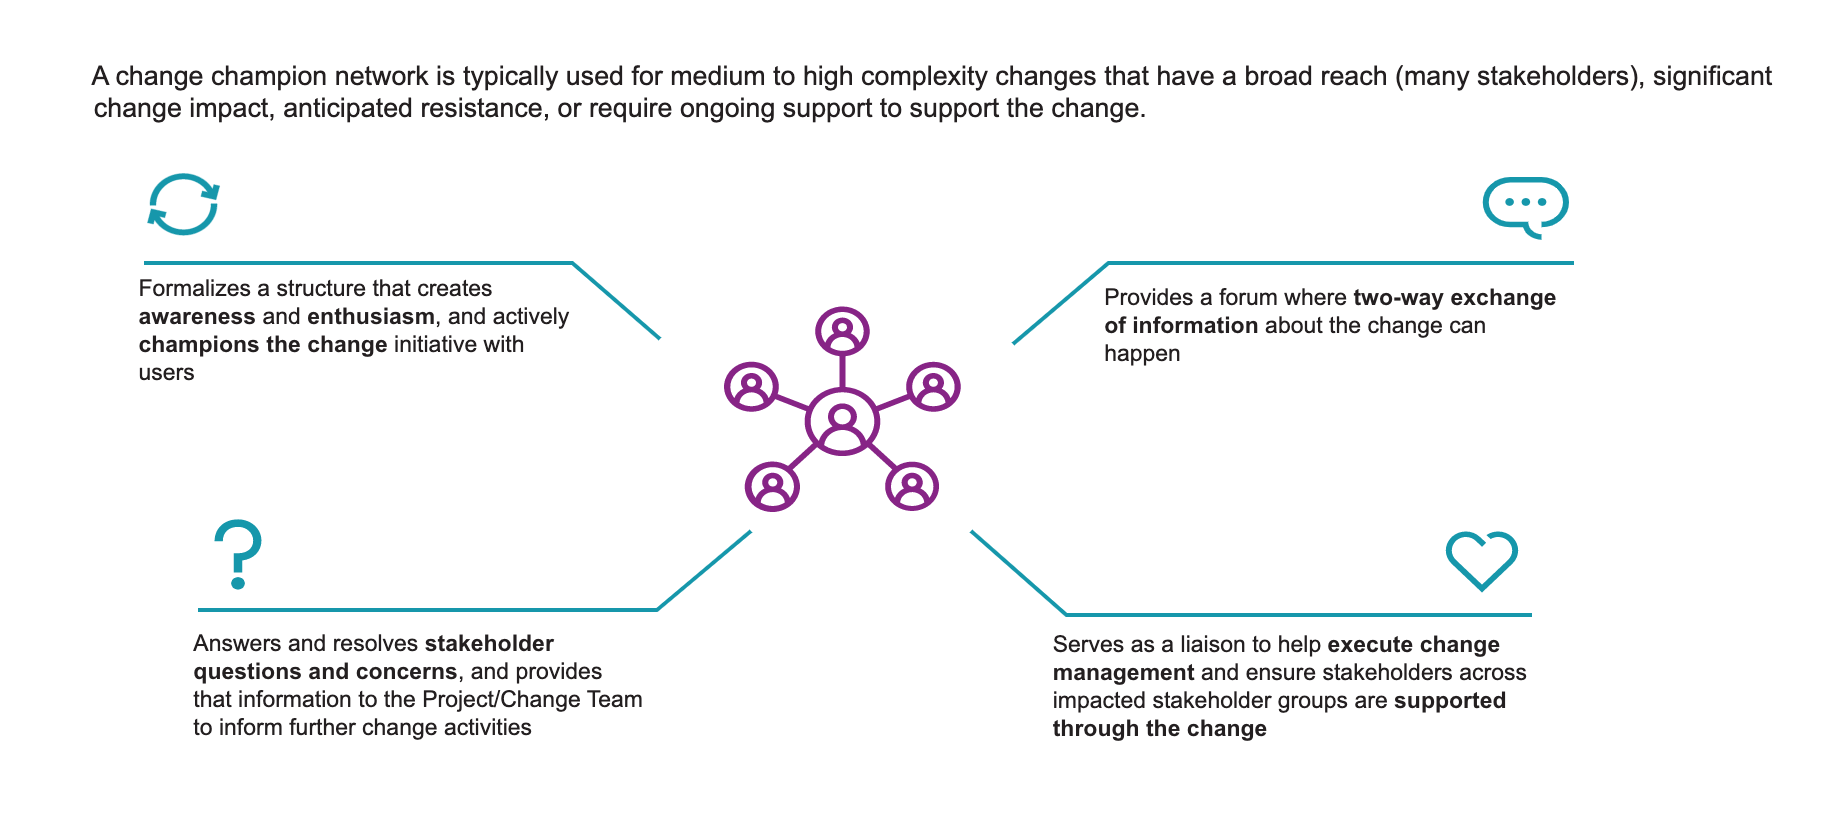 Describes the purpose of a change champion network. 1. Formalizes a structure that creates awareness and enthusiasm, and actively champions the change initiative with users. 2. Provides a forum where two-way exchange of information about the change can happen. 3. Answers and resolves stakeholder questions and concerns, and provides that information to the Project/Change Team to inform further change activities. 4. Serves as a liaison to help execute change management and ensure stakeholders across impacted stakeholder groups are supported through the change.